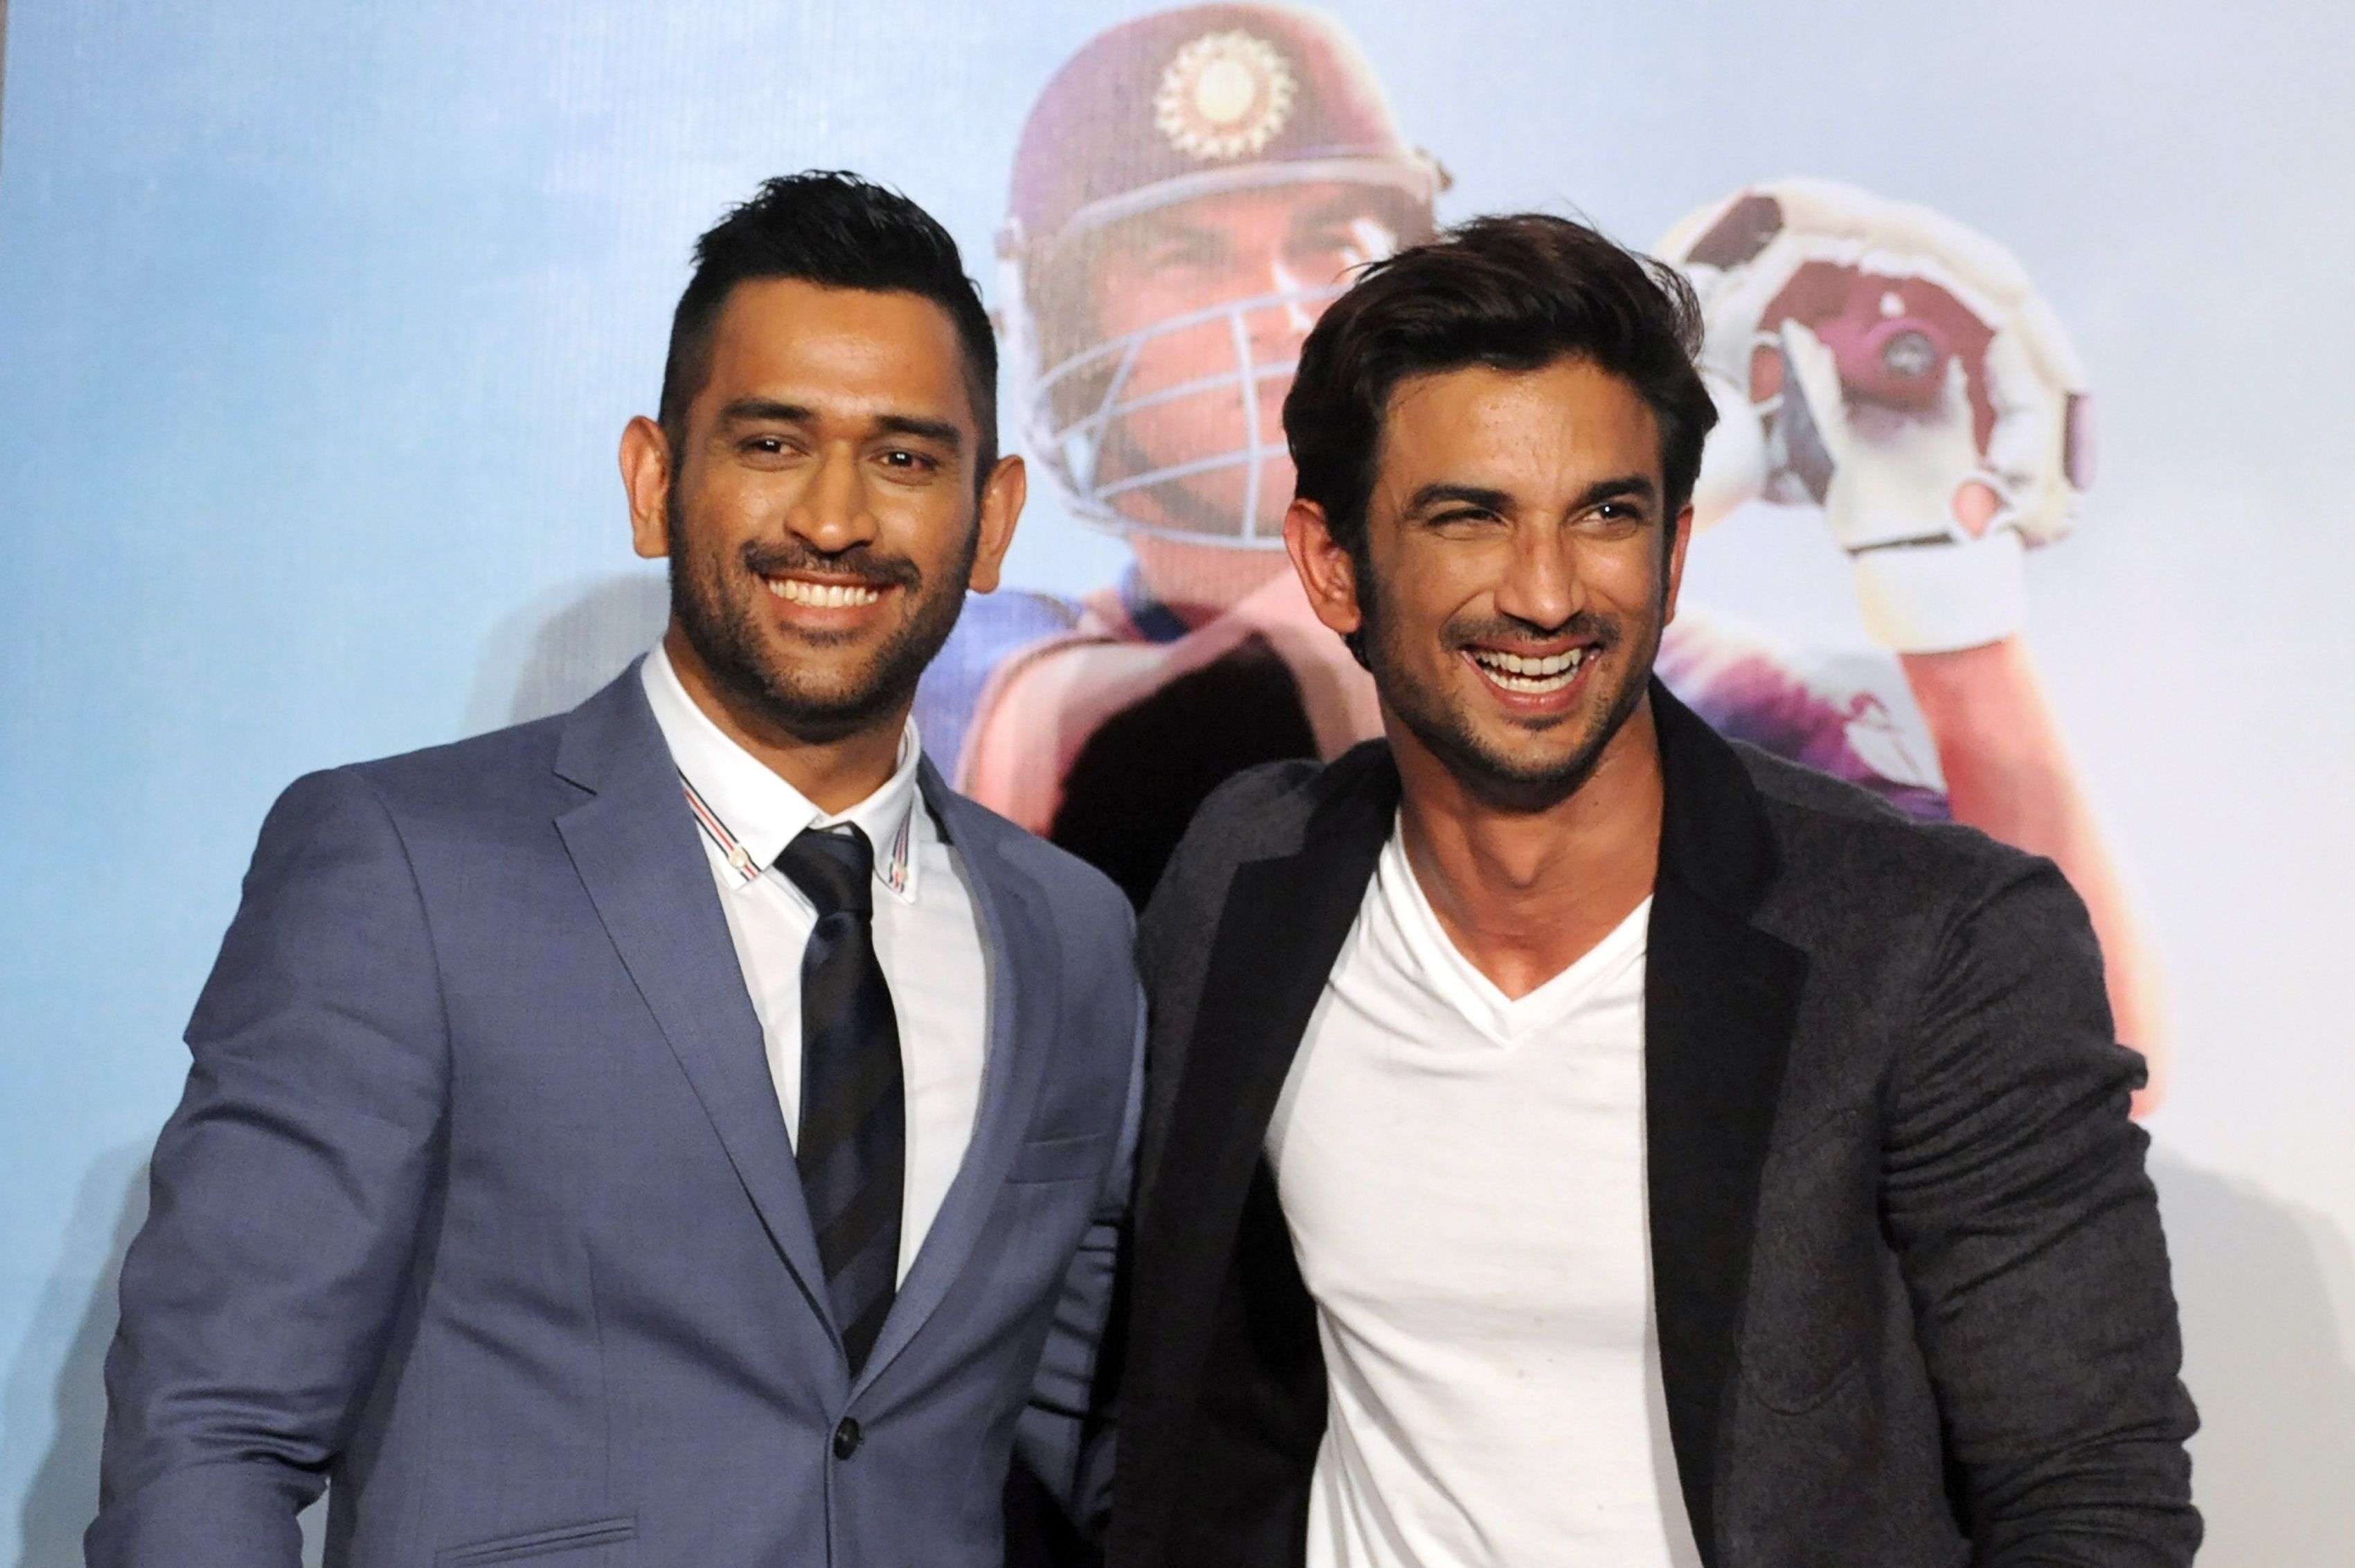 In this photograph taken on August 11, 2016, Indian Bollywood actor Sushant Singh Rajput (R) and Indian cricket captain Mahendra Singh Dhoni pose during the trailer launch in Mumbai of the upcoming biographical film "MS Dhoni: The Untold Story" directed by Neeraj Pandey. "MS Dhoni: The Untold Story", due for release on September 30, charts the rise of India's limited-overs captain from boy to train ticket collector to World Cup glory. / AFP PHOTO / STR / TO GO WITH India-entertainment-film-Bollywood-cricket-Dhoni, FOCUS by Peter Hutchison